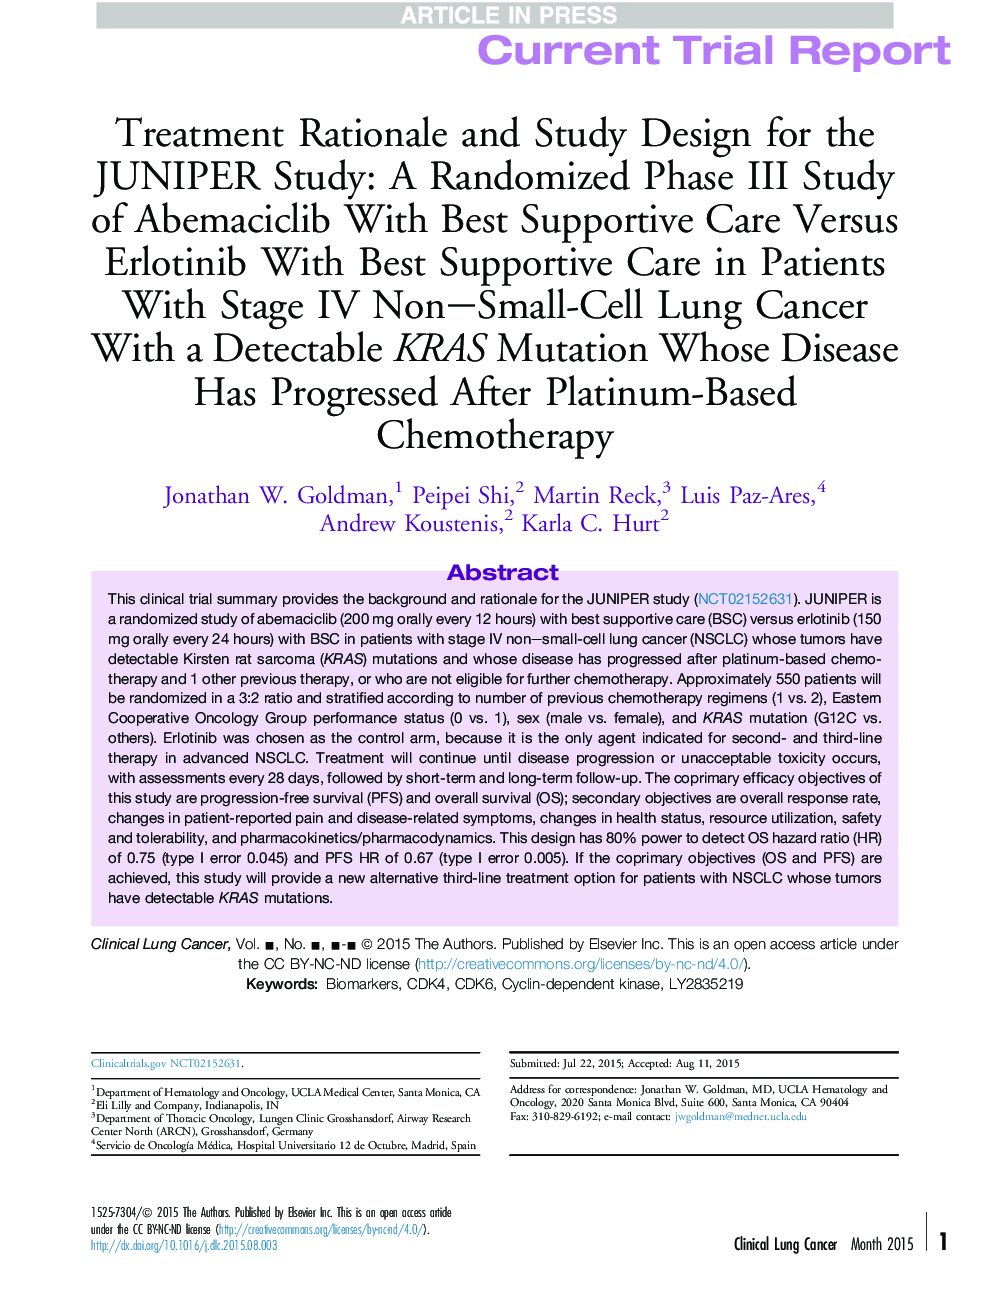 Treatment Rationale and Study Design for the JUNIPER Study: A Randomized Phase III Study of Abemaciclib With Best Supportive Care Versus Erlotinib With Best Supportive Care in Patients With Stage IV Non-Small-Cell Lung Cancer With a Detectable KRAS Mutati